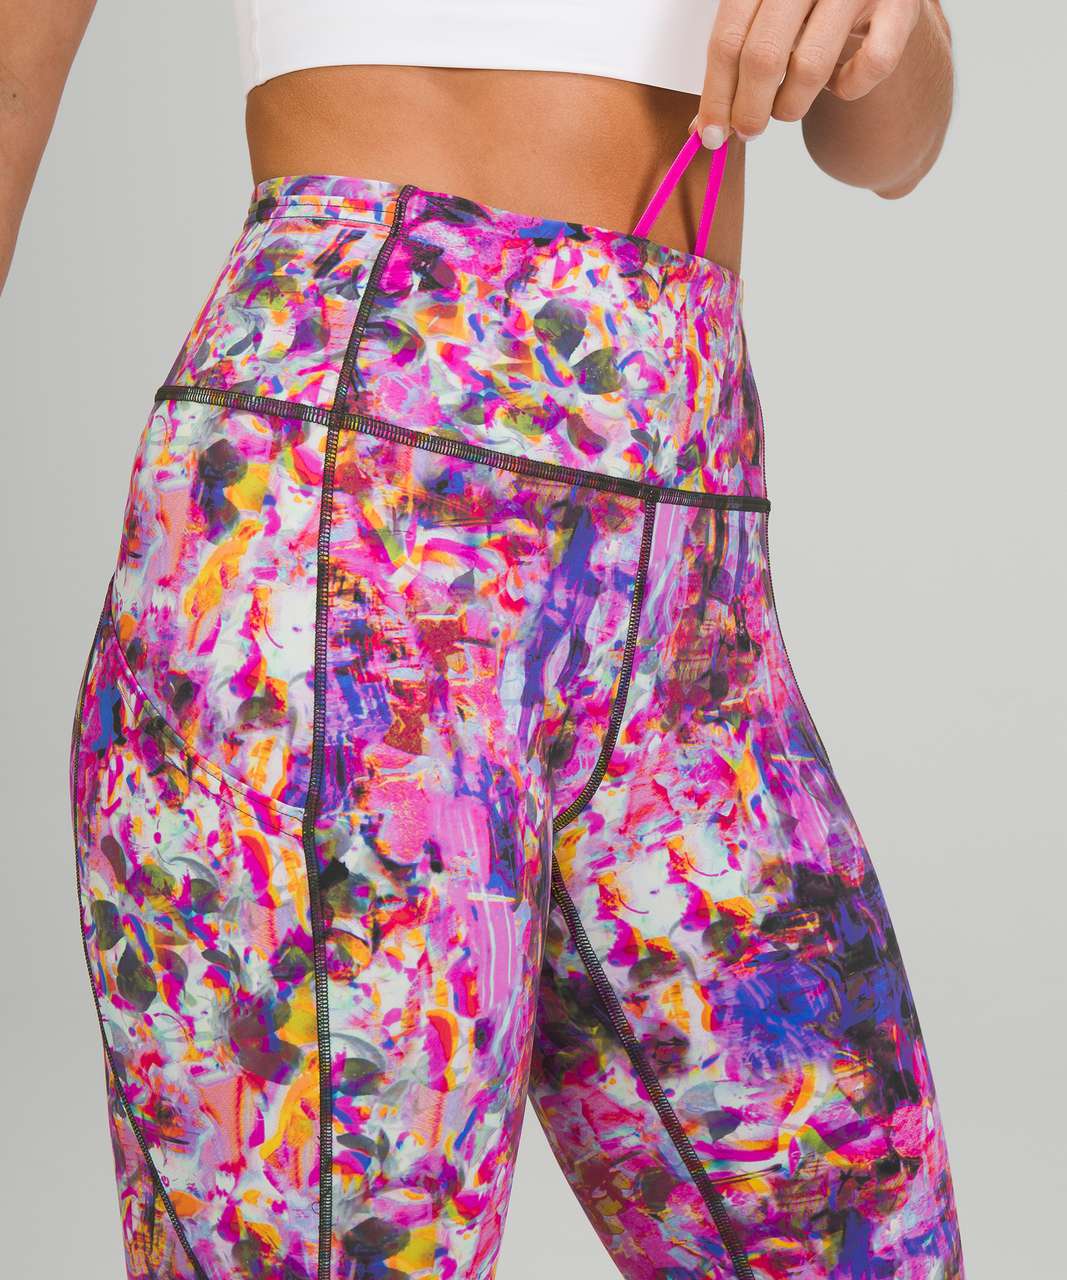 Lululemon SeaWheeze Fast and Free High-Rise Tight 25" - Flash Floral Multi